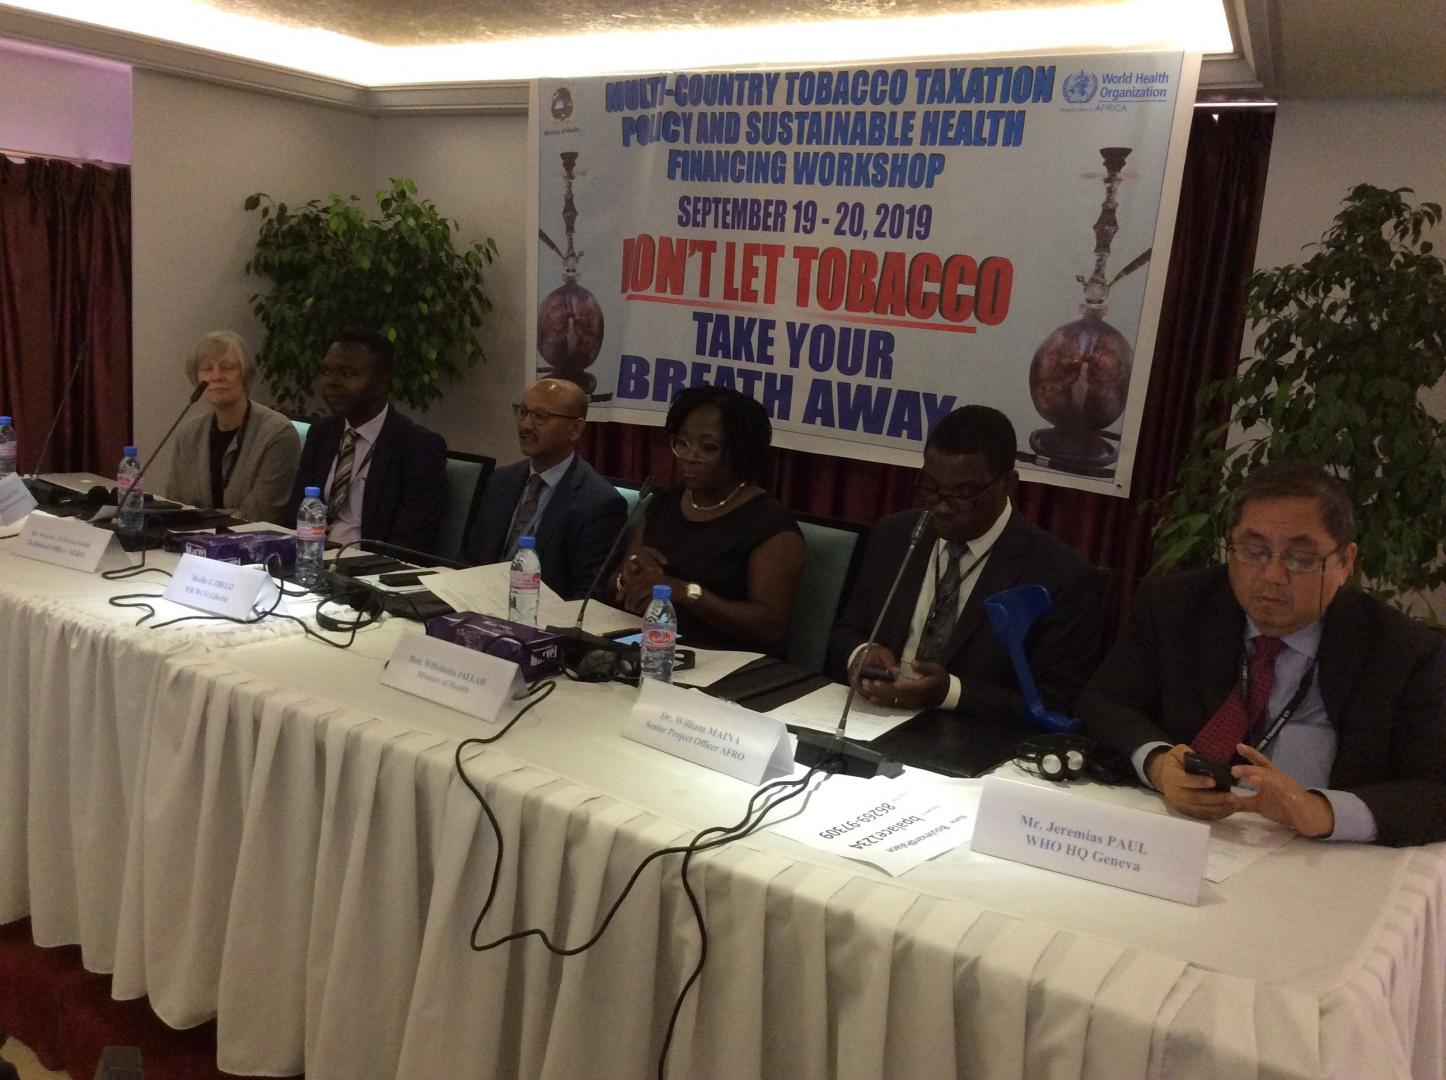 Ms. Norwu Howard, Dep. Health Minister, Dr. Mesfin G. Zbelo, WHO Country Rep. a.i., Dr. William Maina, WHO AFRO Project Officer for Tobacco and other high-profile delegates at the Tobacco Taxation Policy and Health Financing Workshop in Monrovia